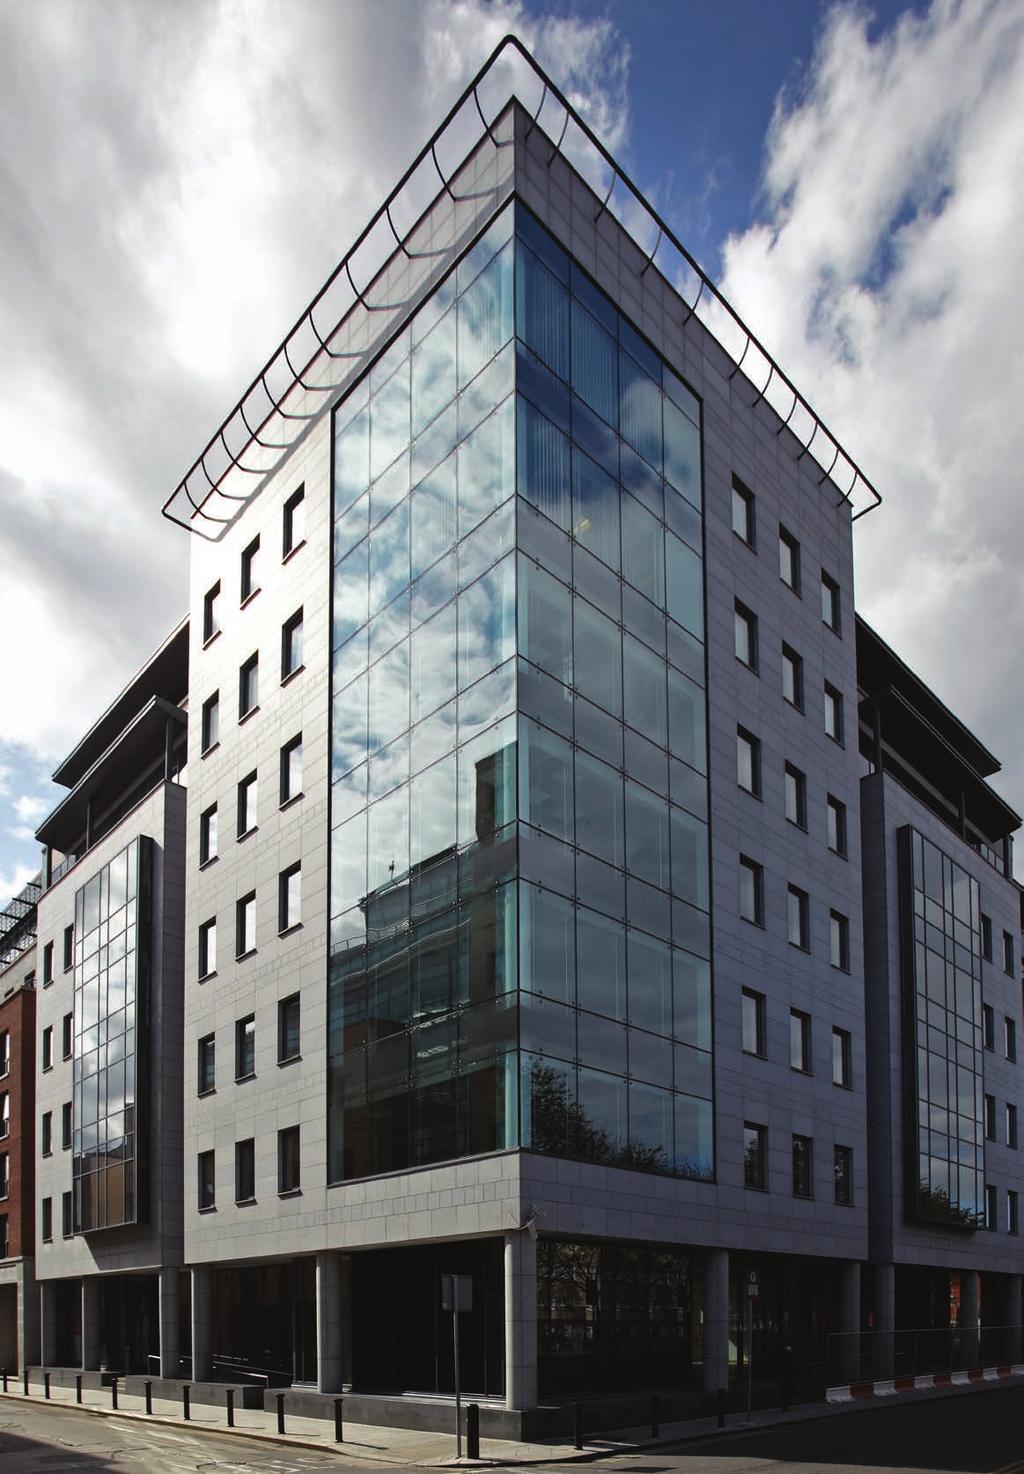 Gloucester Place Lower Dublin 1 Bloom House is a modern office building located in the heart of Dublin